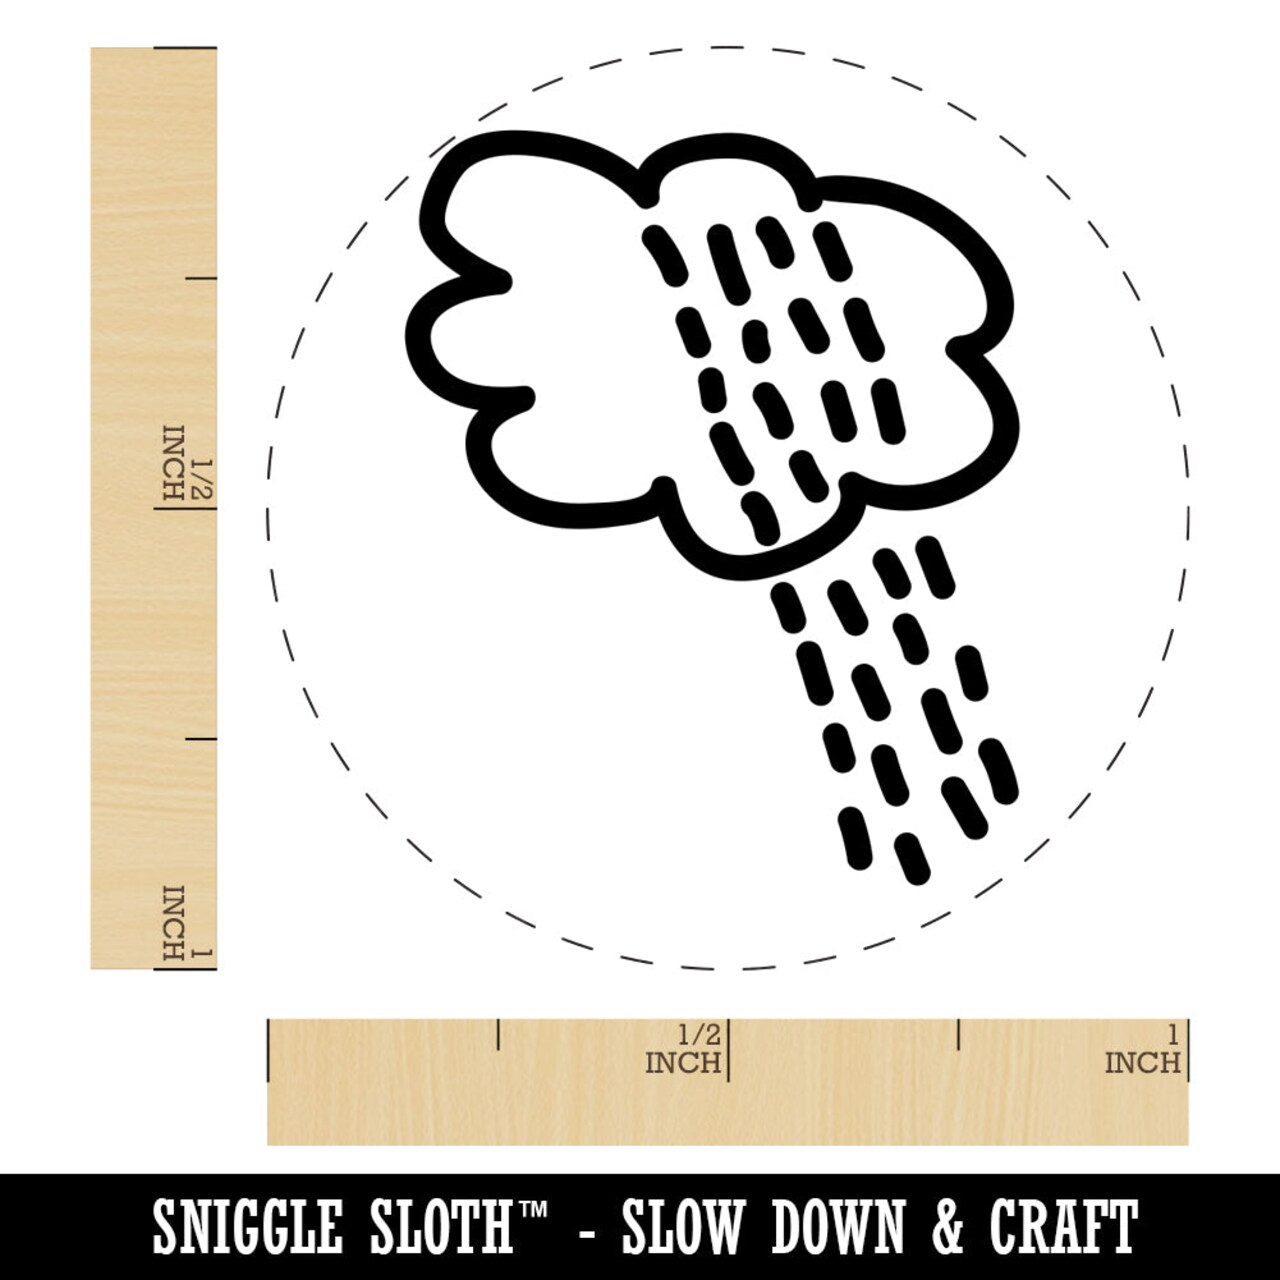 Rain Storm Doodle Self-Inking Rubber Stamp for Stamping Crafting Planners